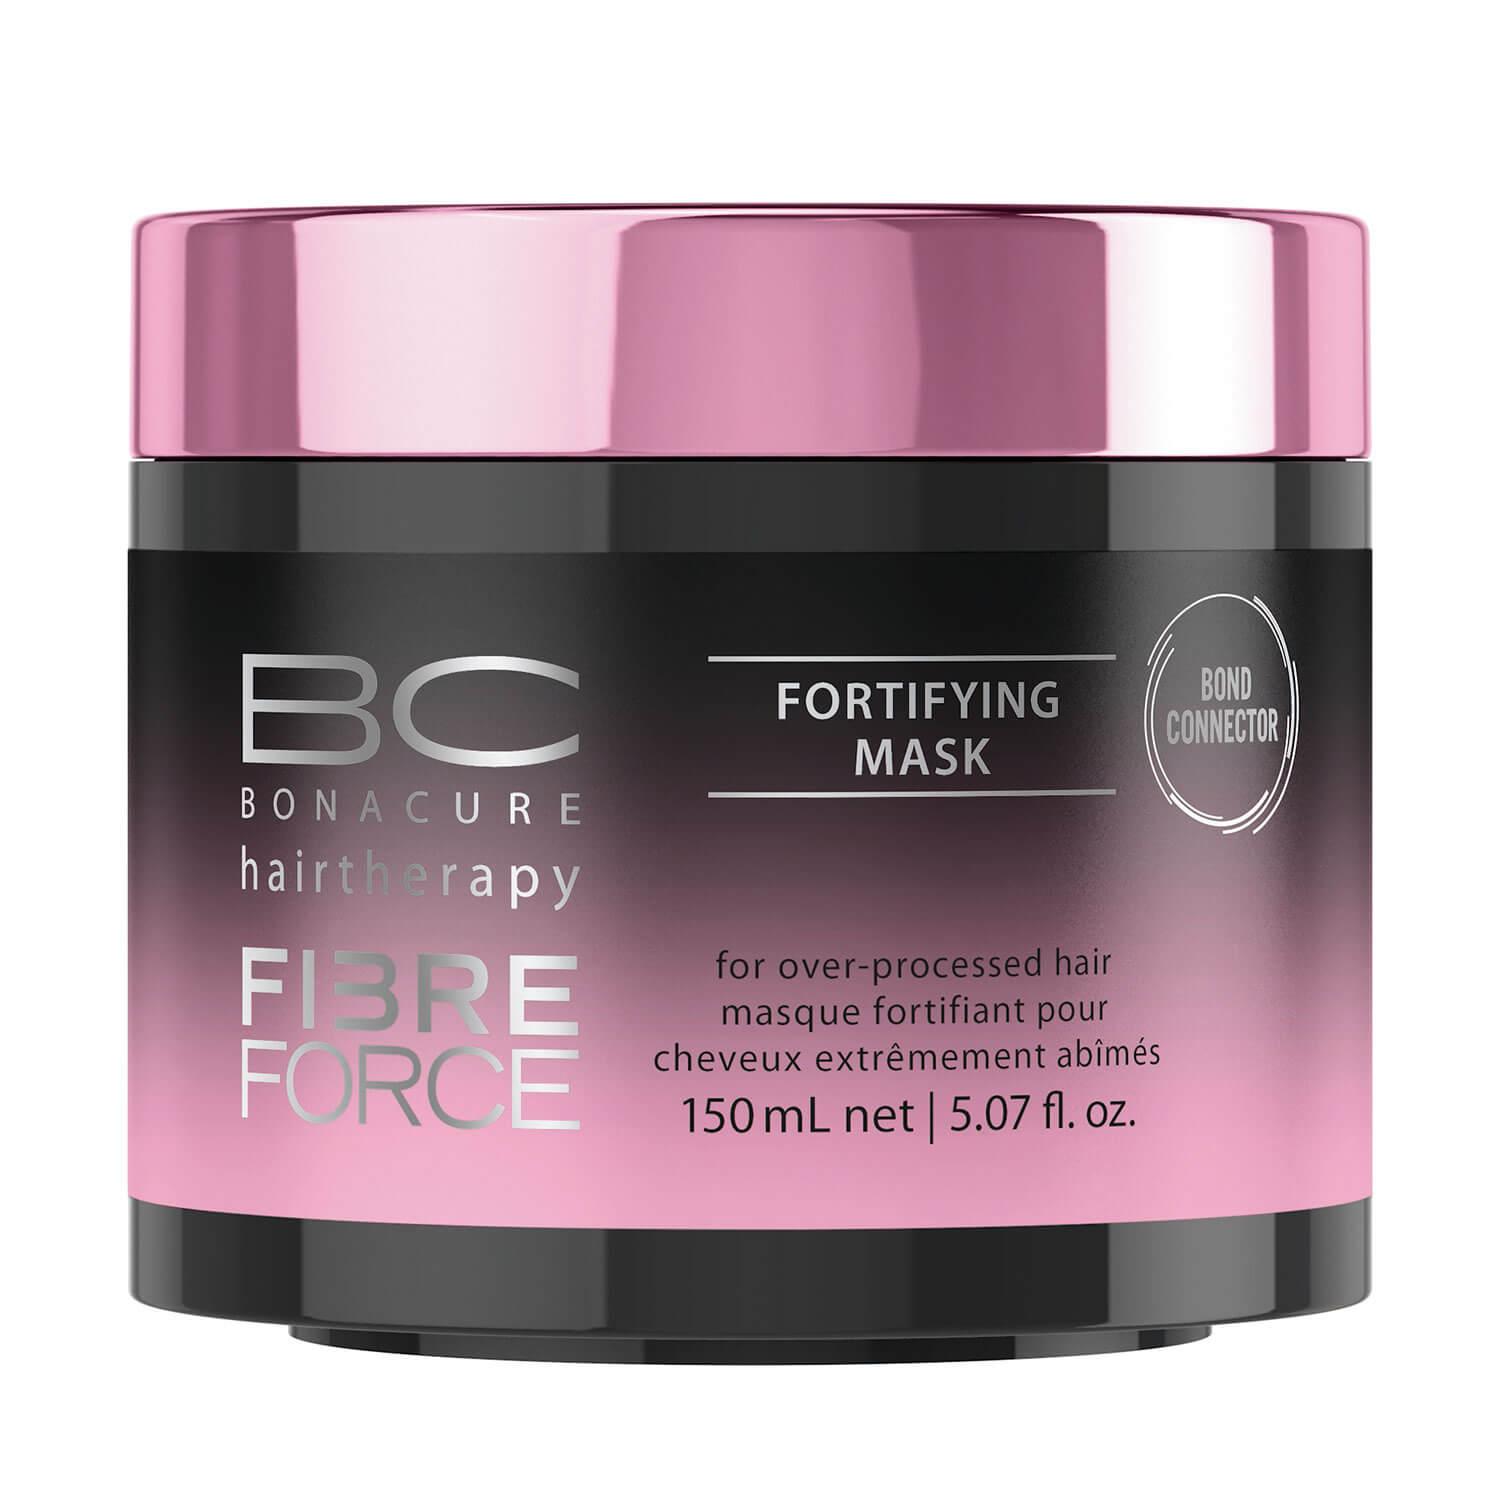 BC Fibre Force - Fortifying Mask